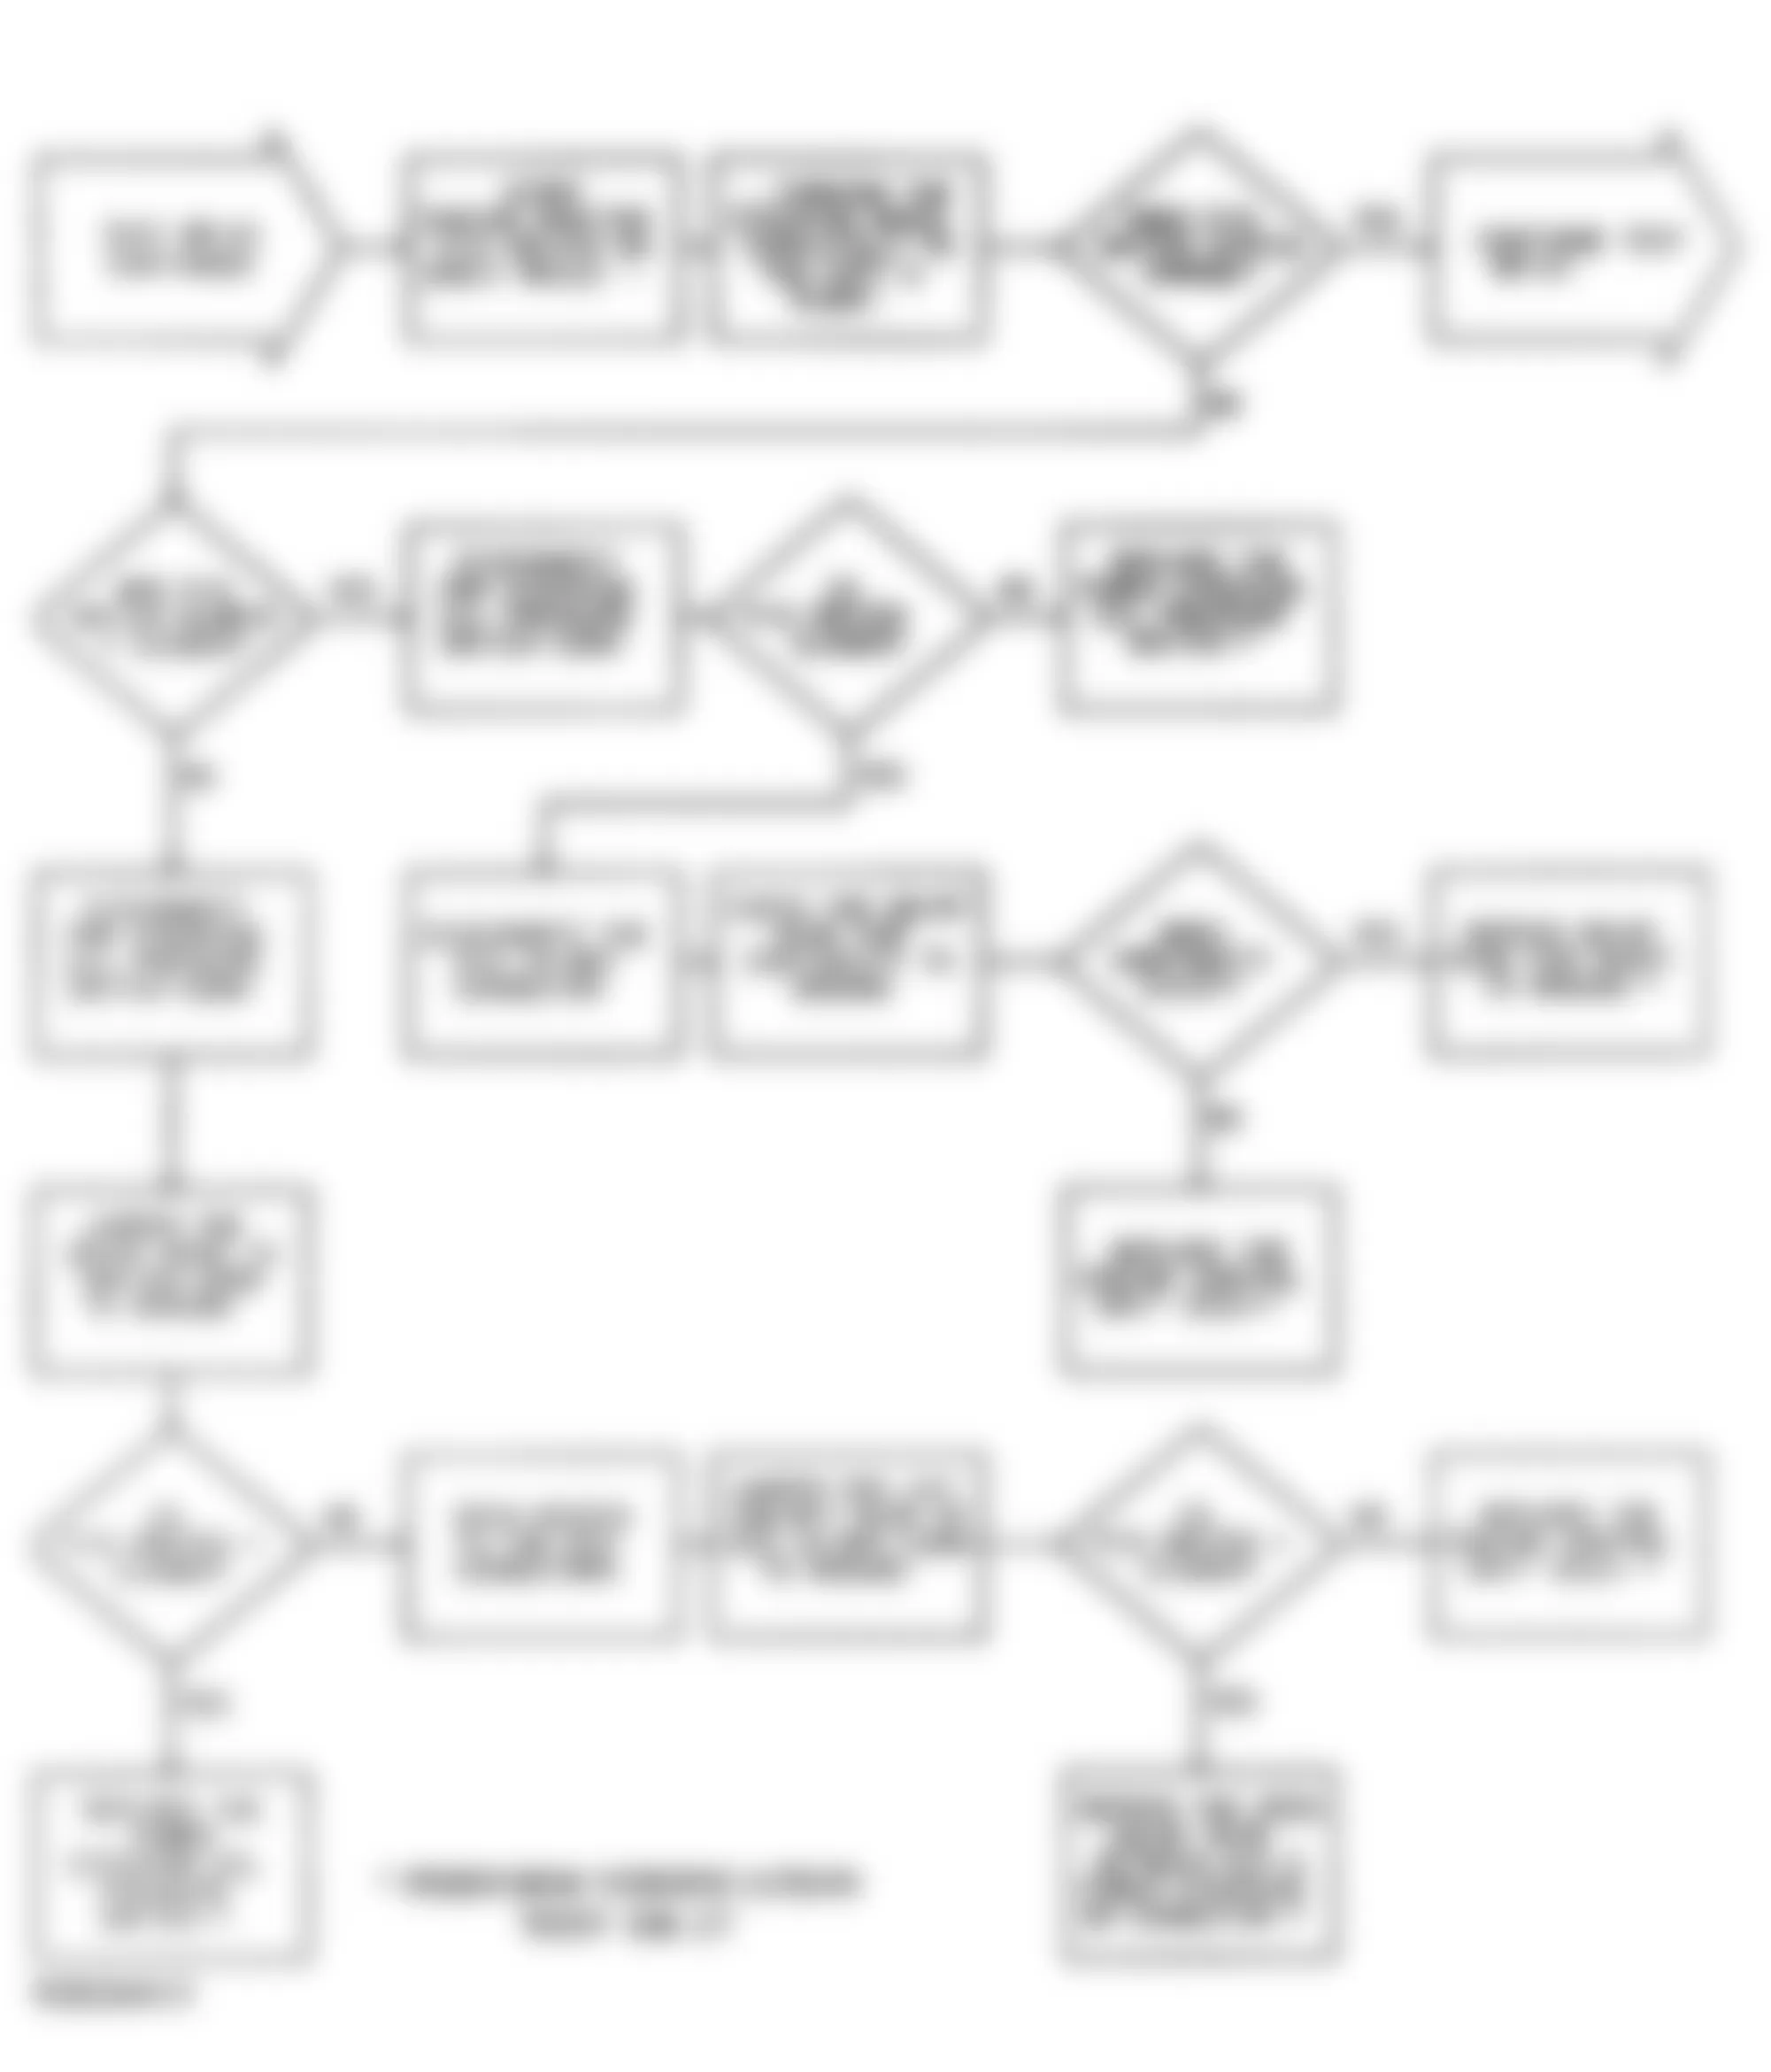 Dodge Stealth R/T Turbo 1991 - Component Locations -  Test DR-21 Flow Chart (2 Of 3) No Fault Code Switch Tests